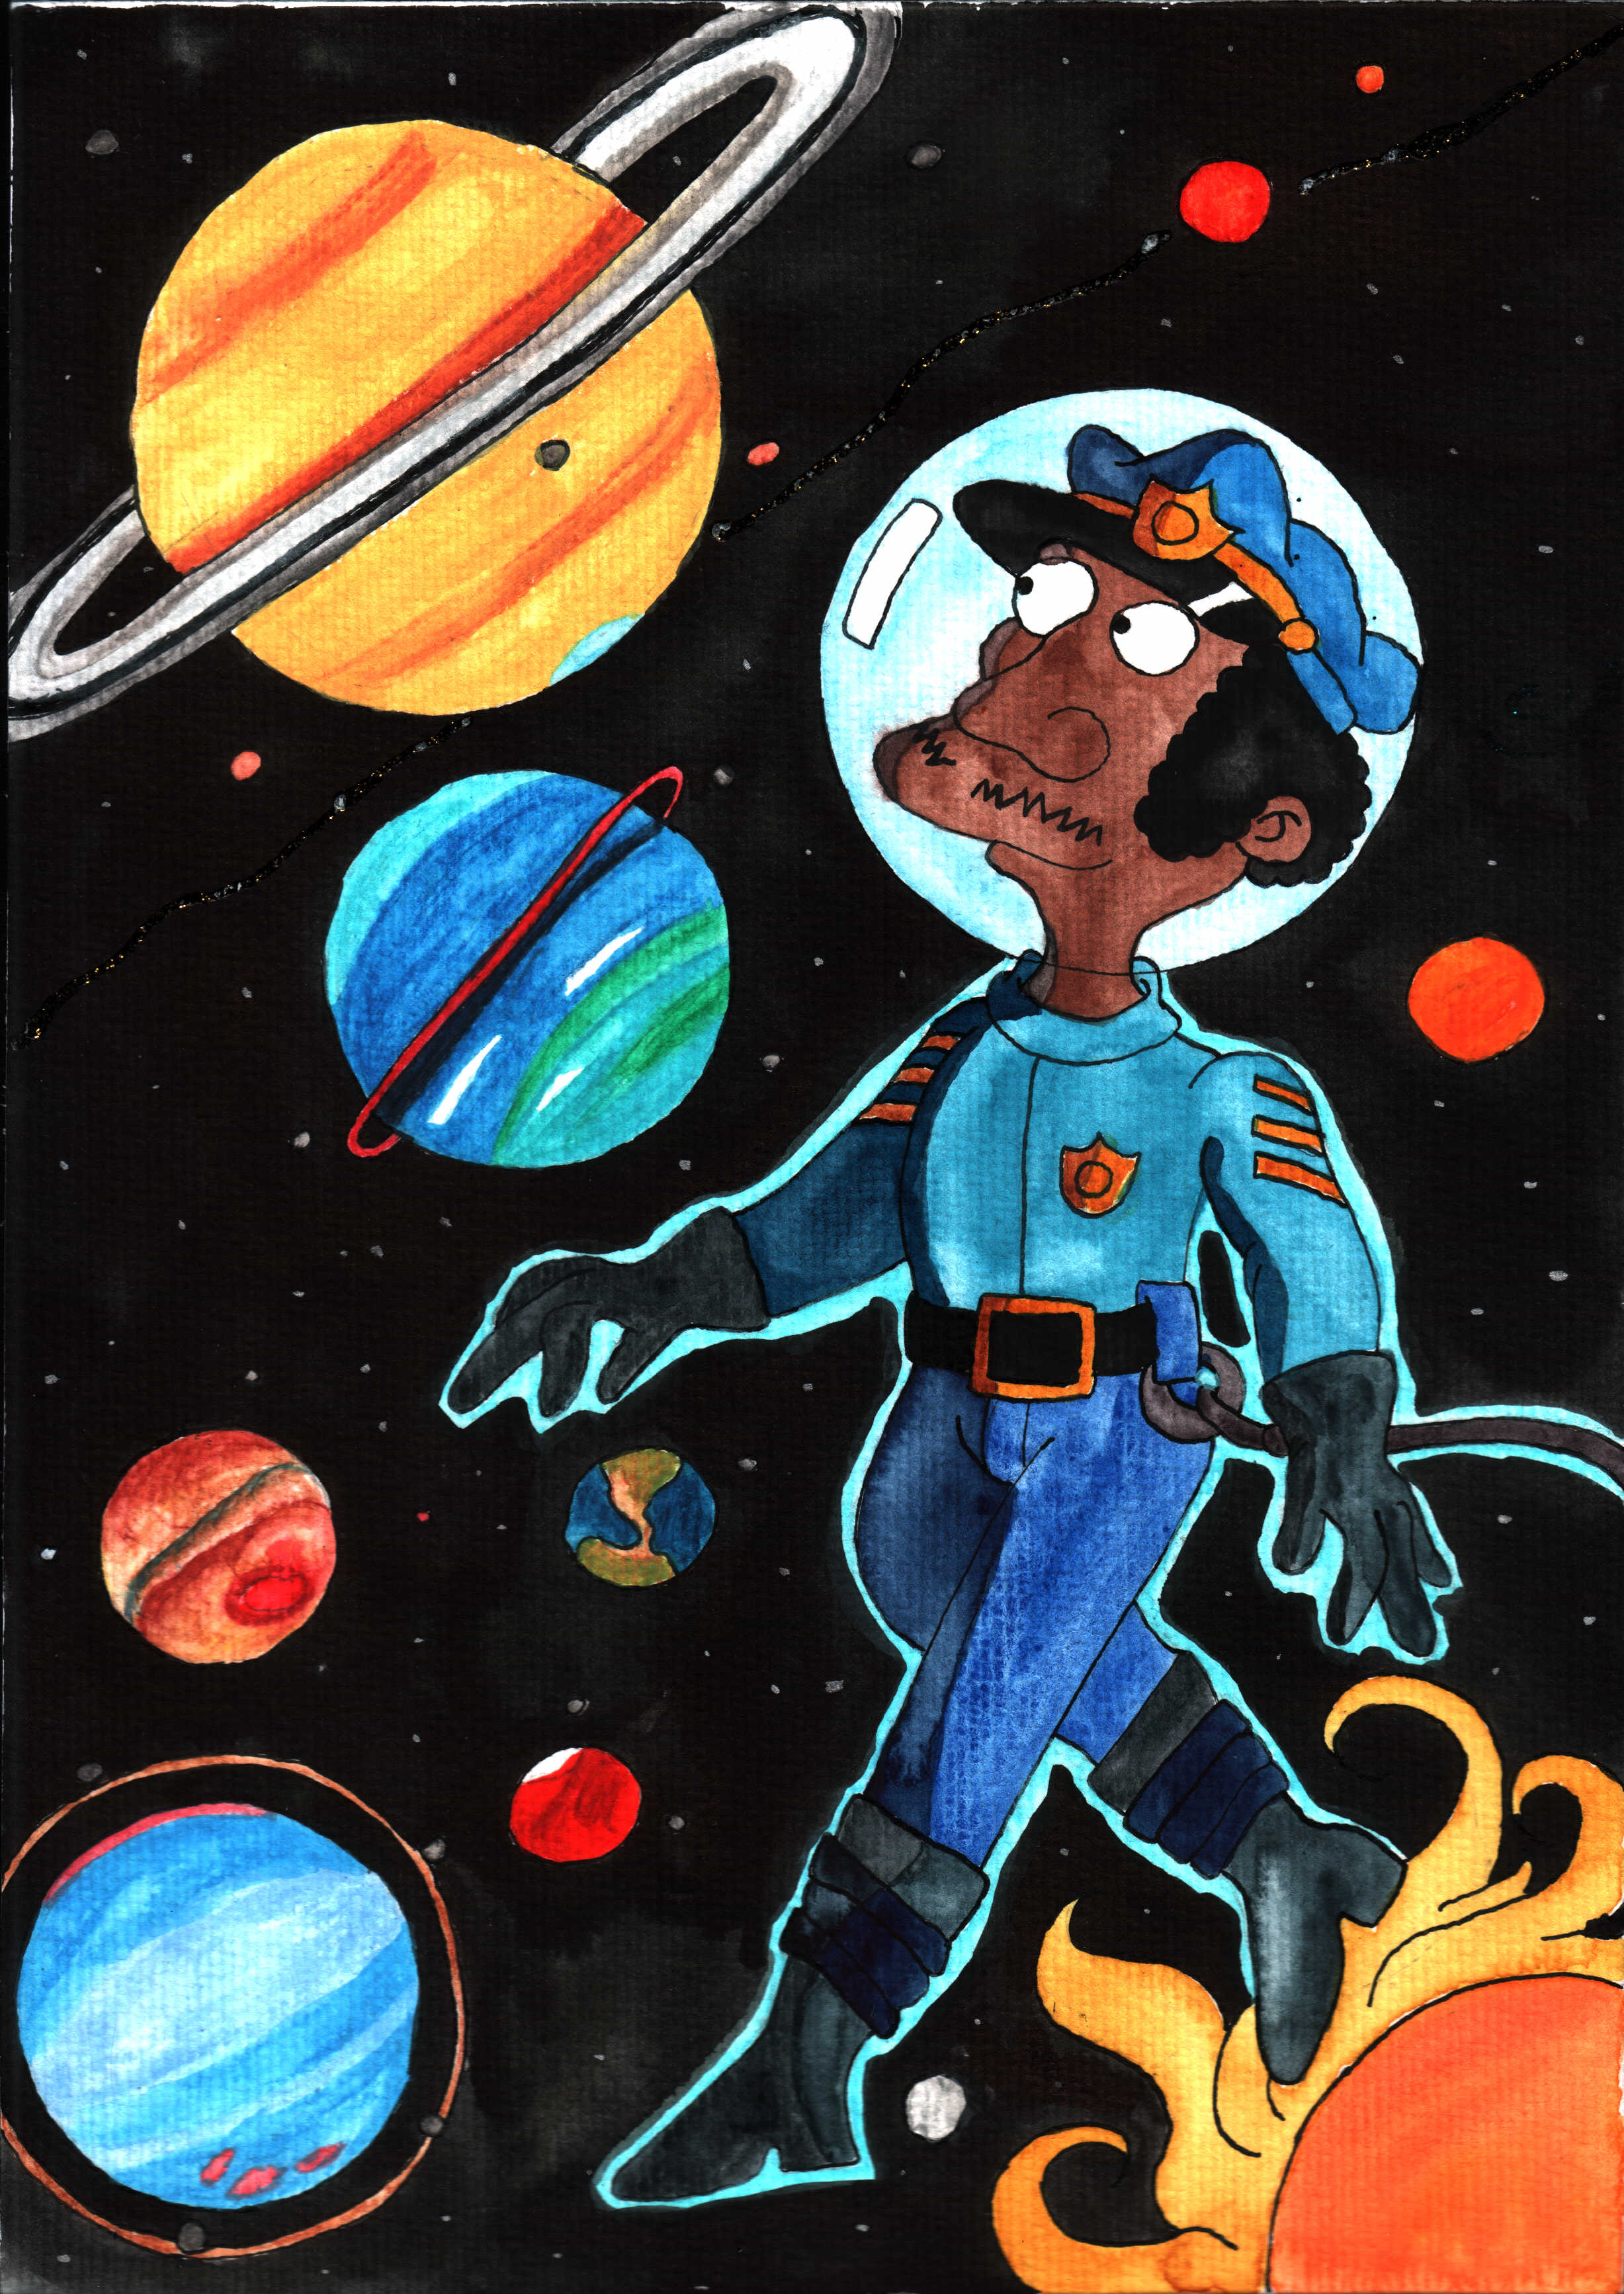 Back in space by Marilyn